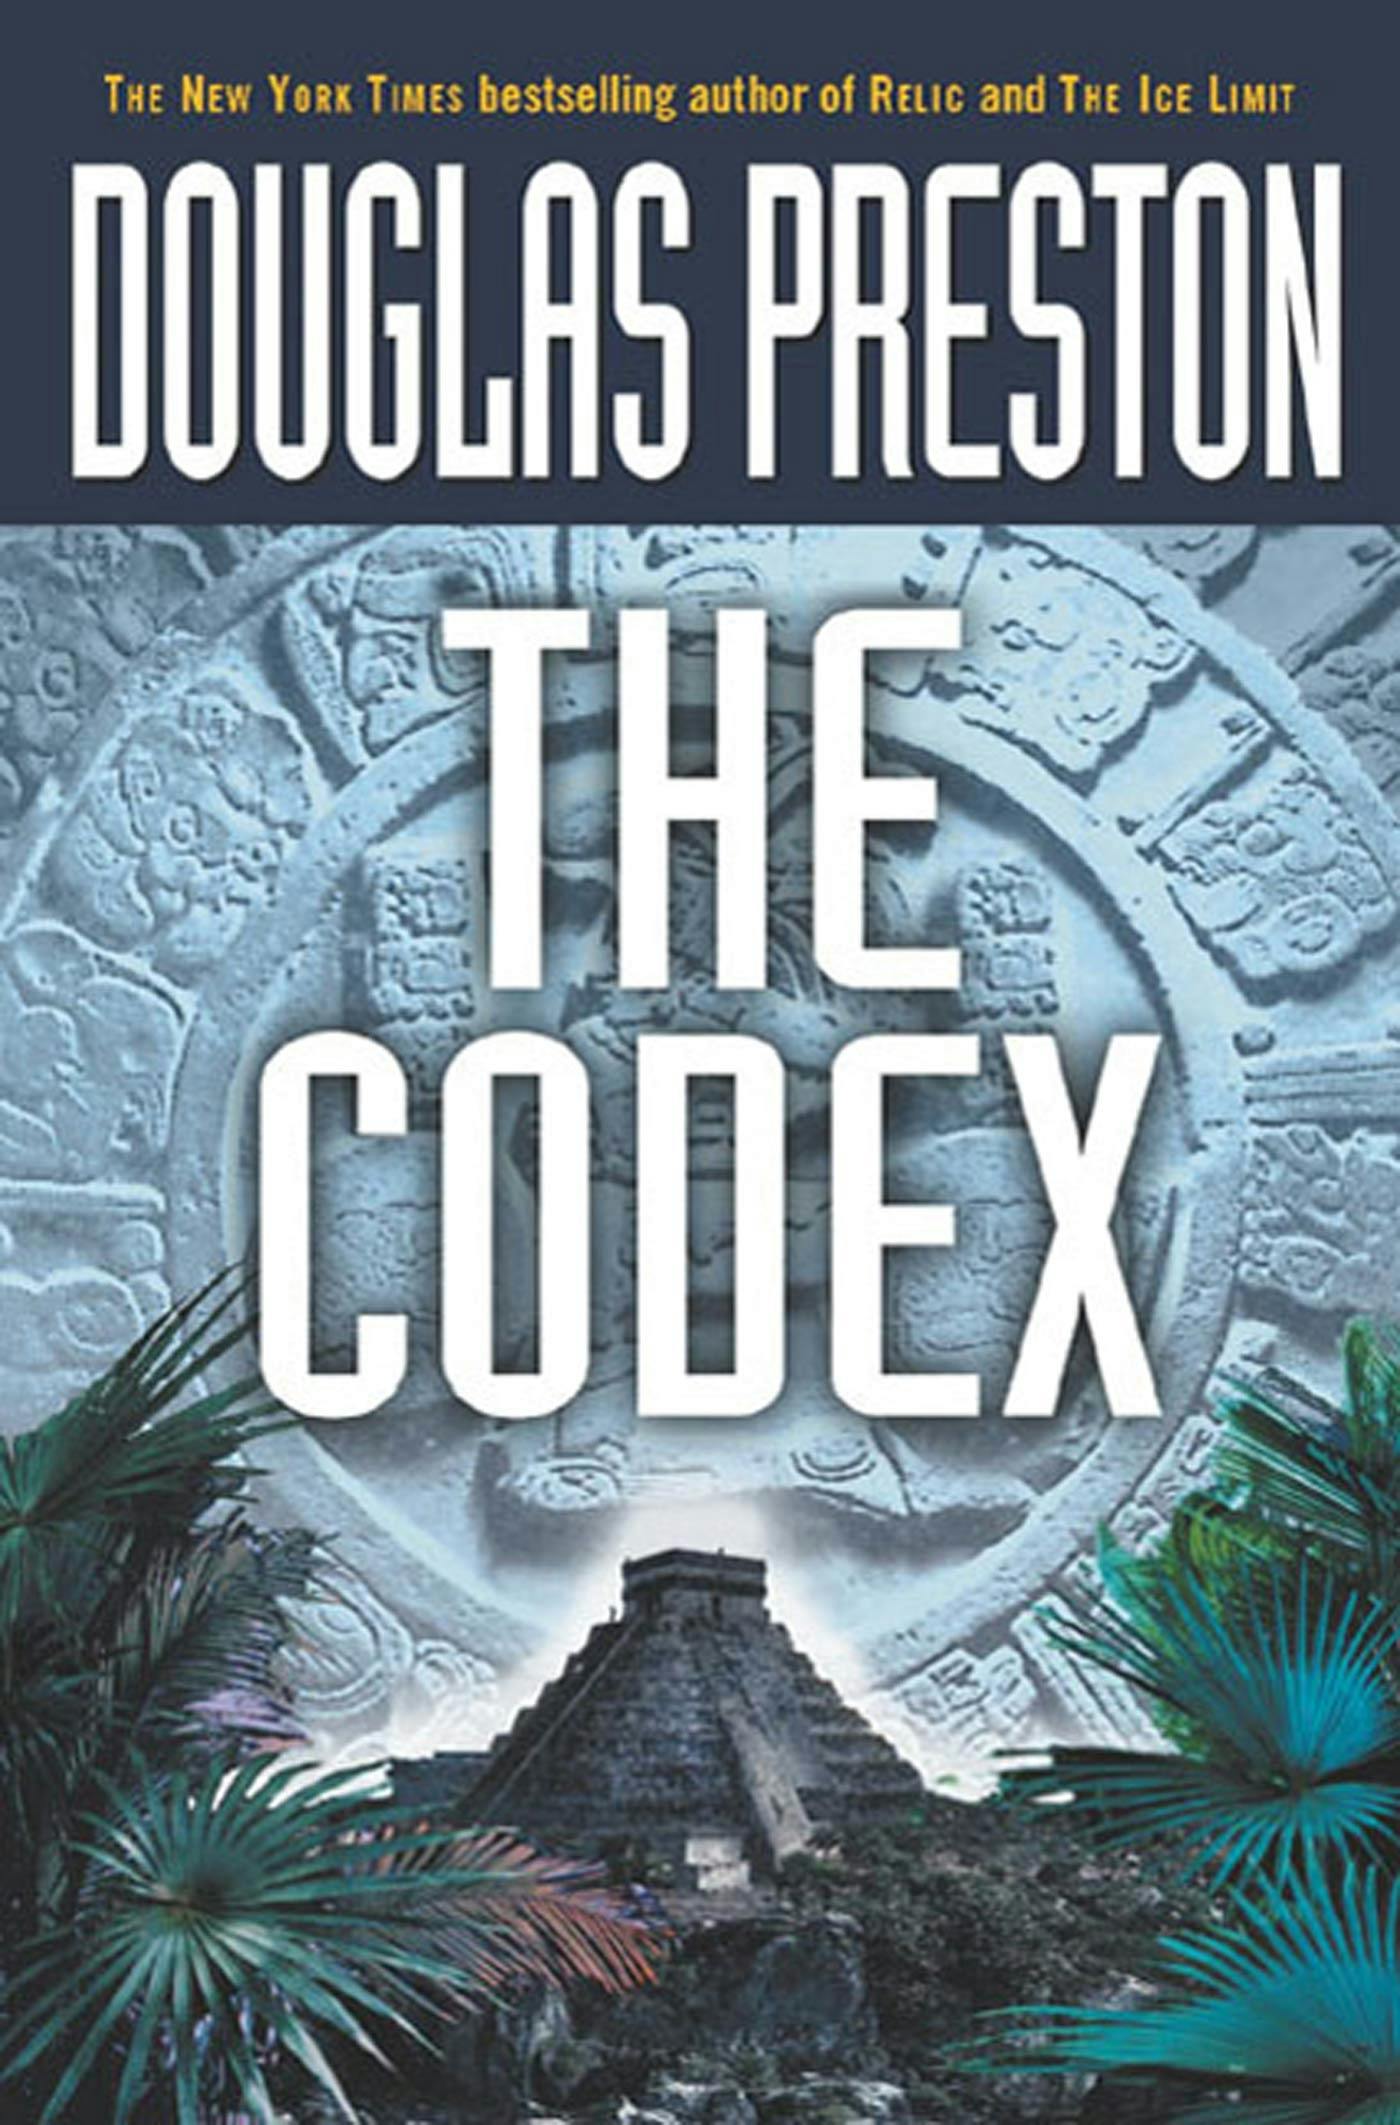 Cover for the book titled as: The Codex